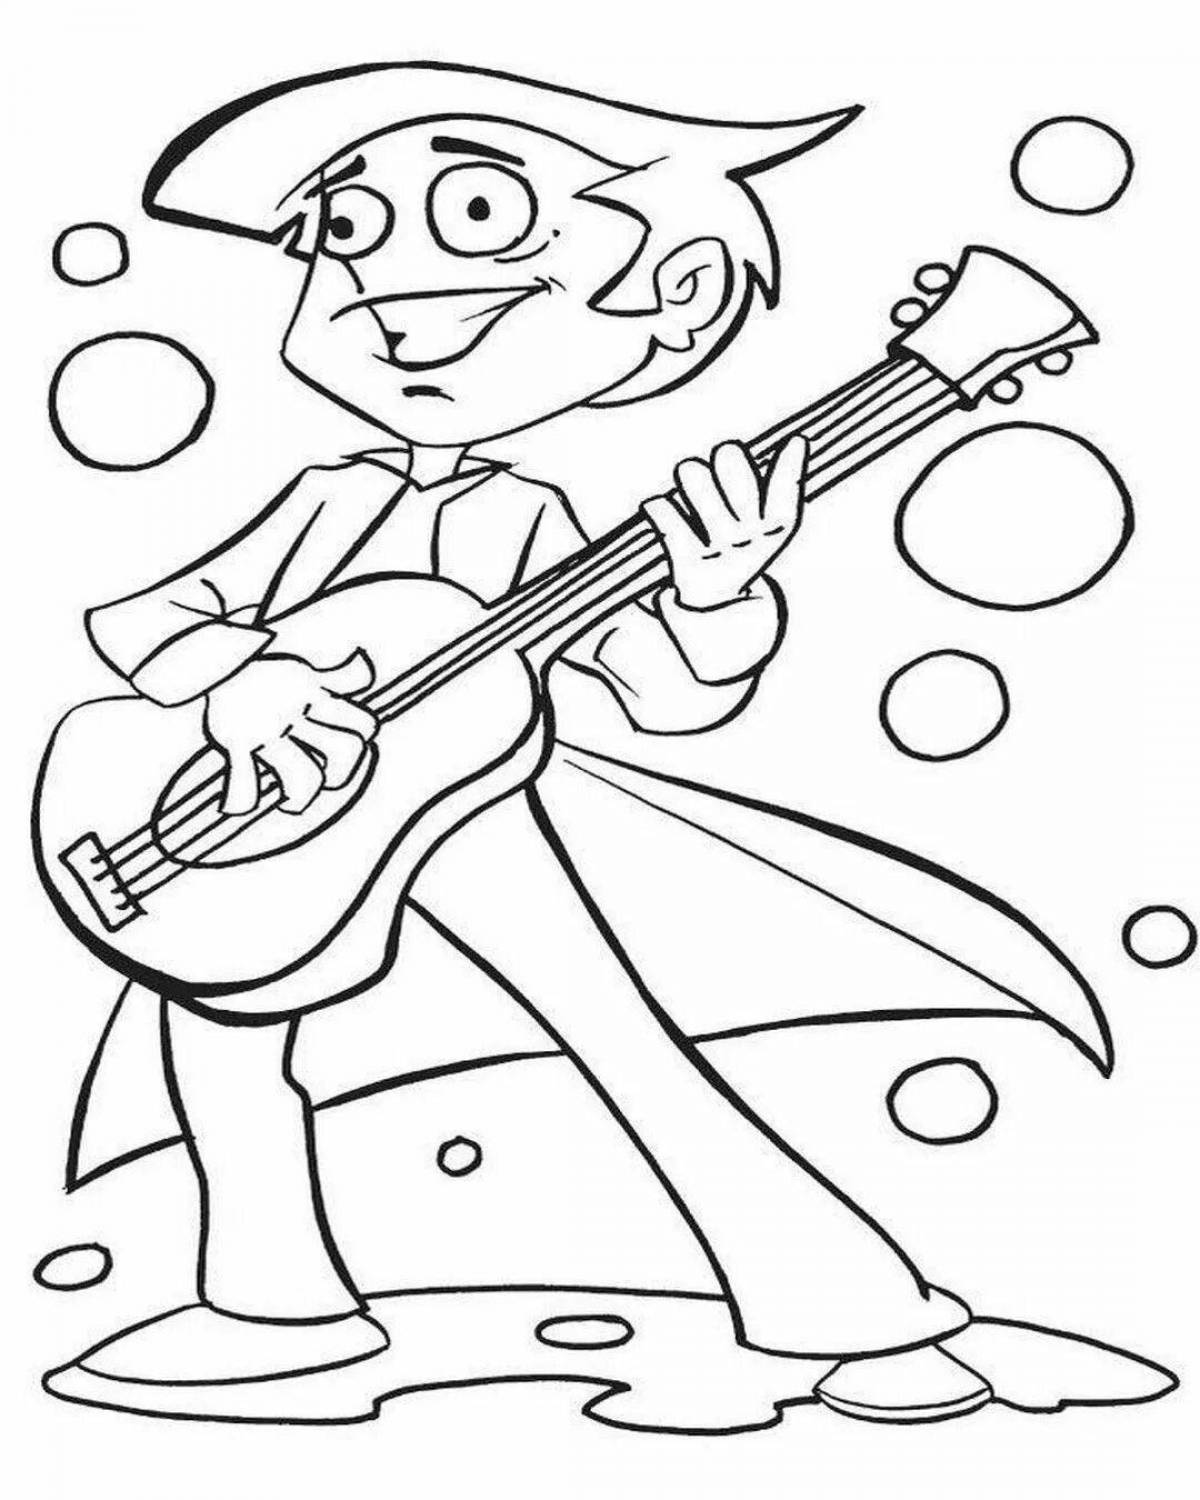 Charming singer coloring book for kids